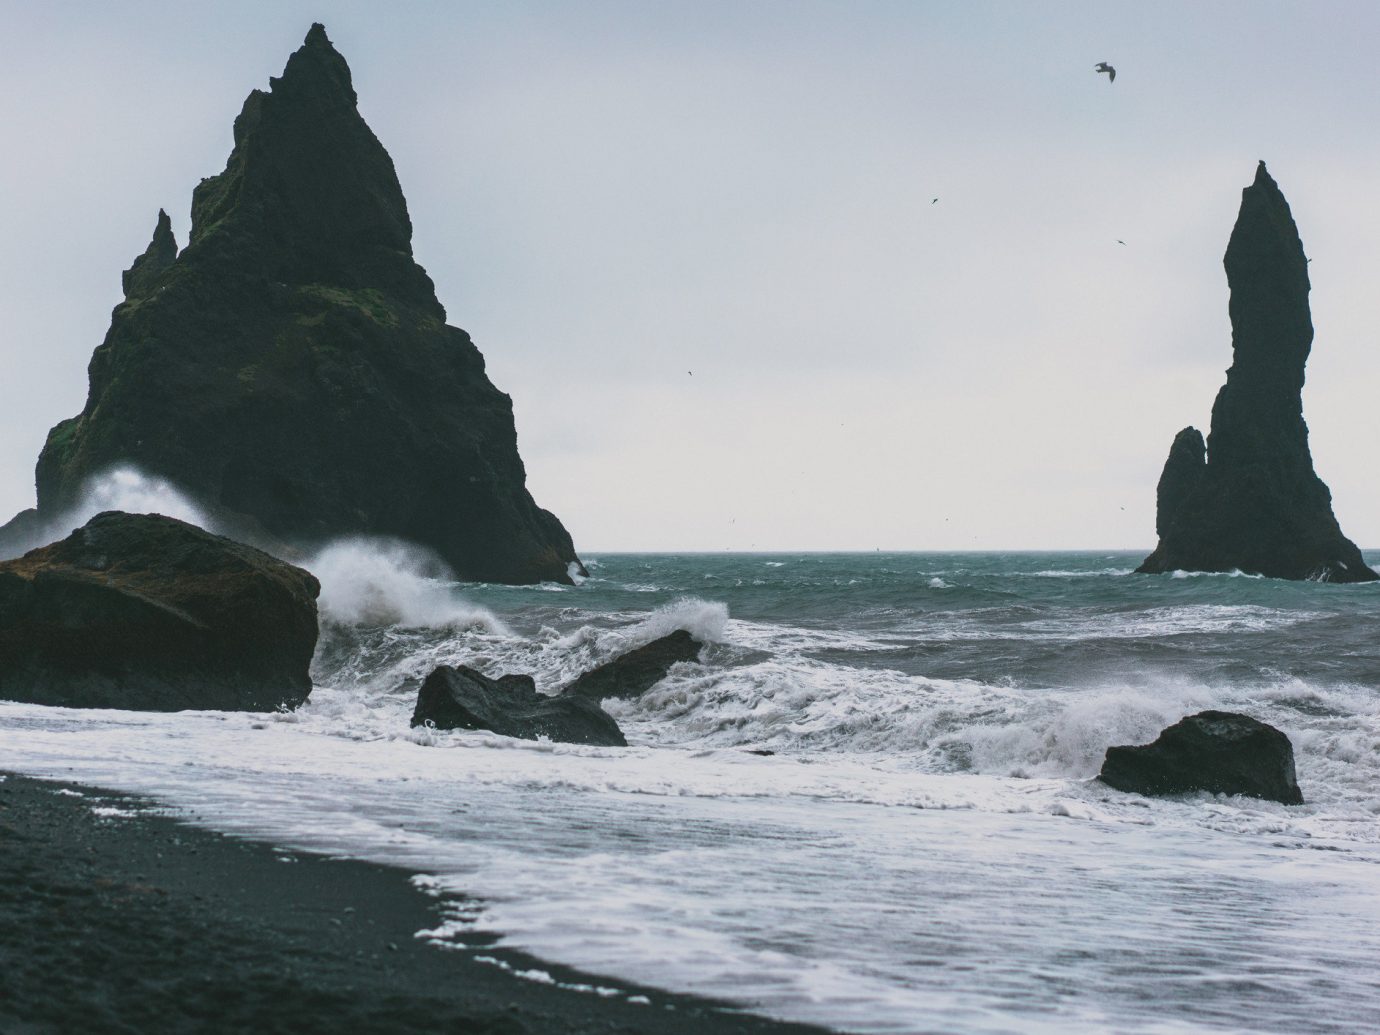 Iceland Outdoors + Adventure outdoor water sky Sea Coast coastal and oceanic landforms Ocean Nature wave headland shore promontory rock mountain wind wave stack rocky cape terrain cliff islet klippe tide formation